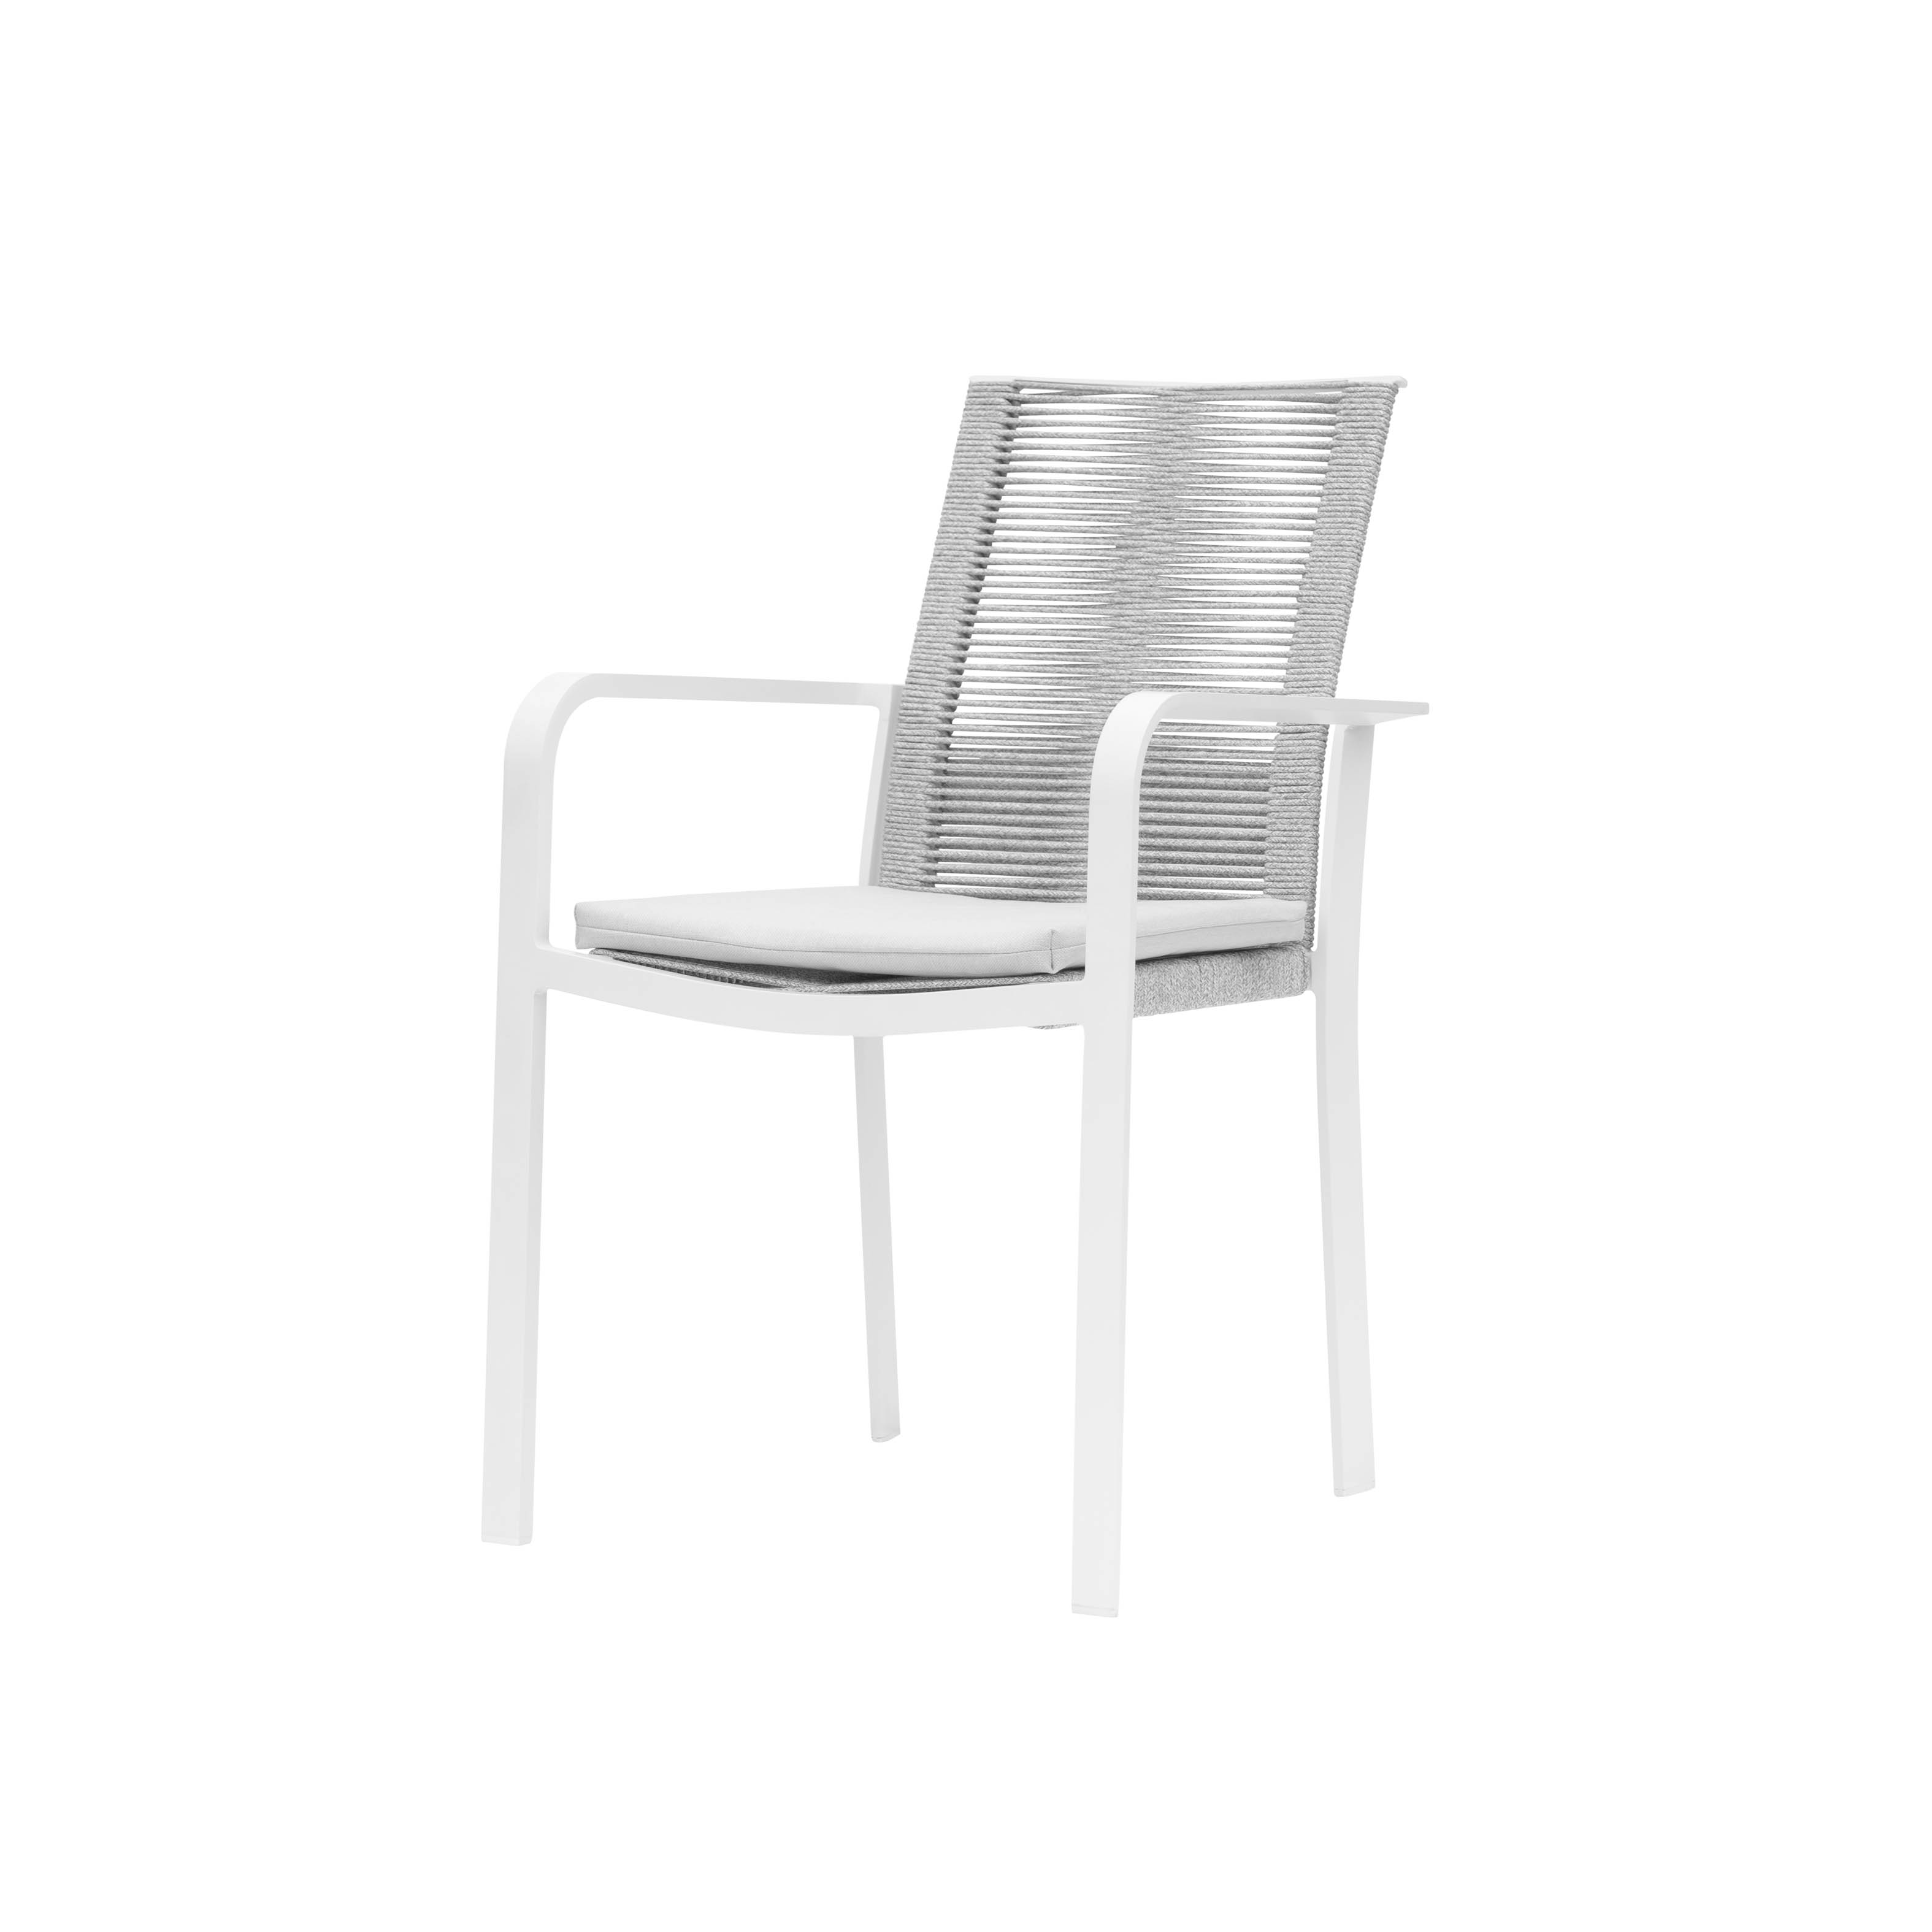 Linz dining chair S4